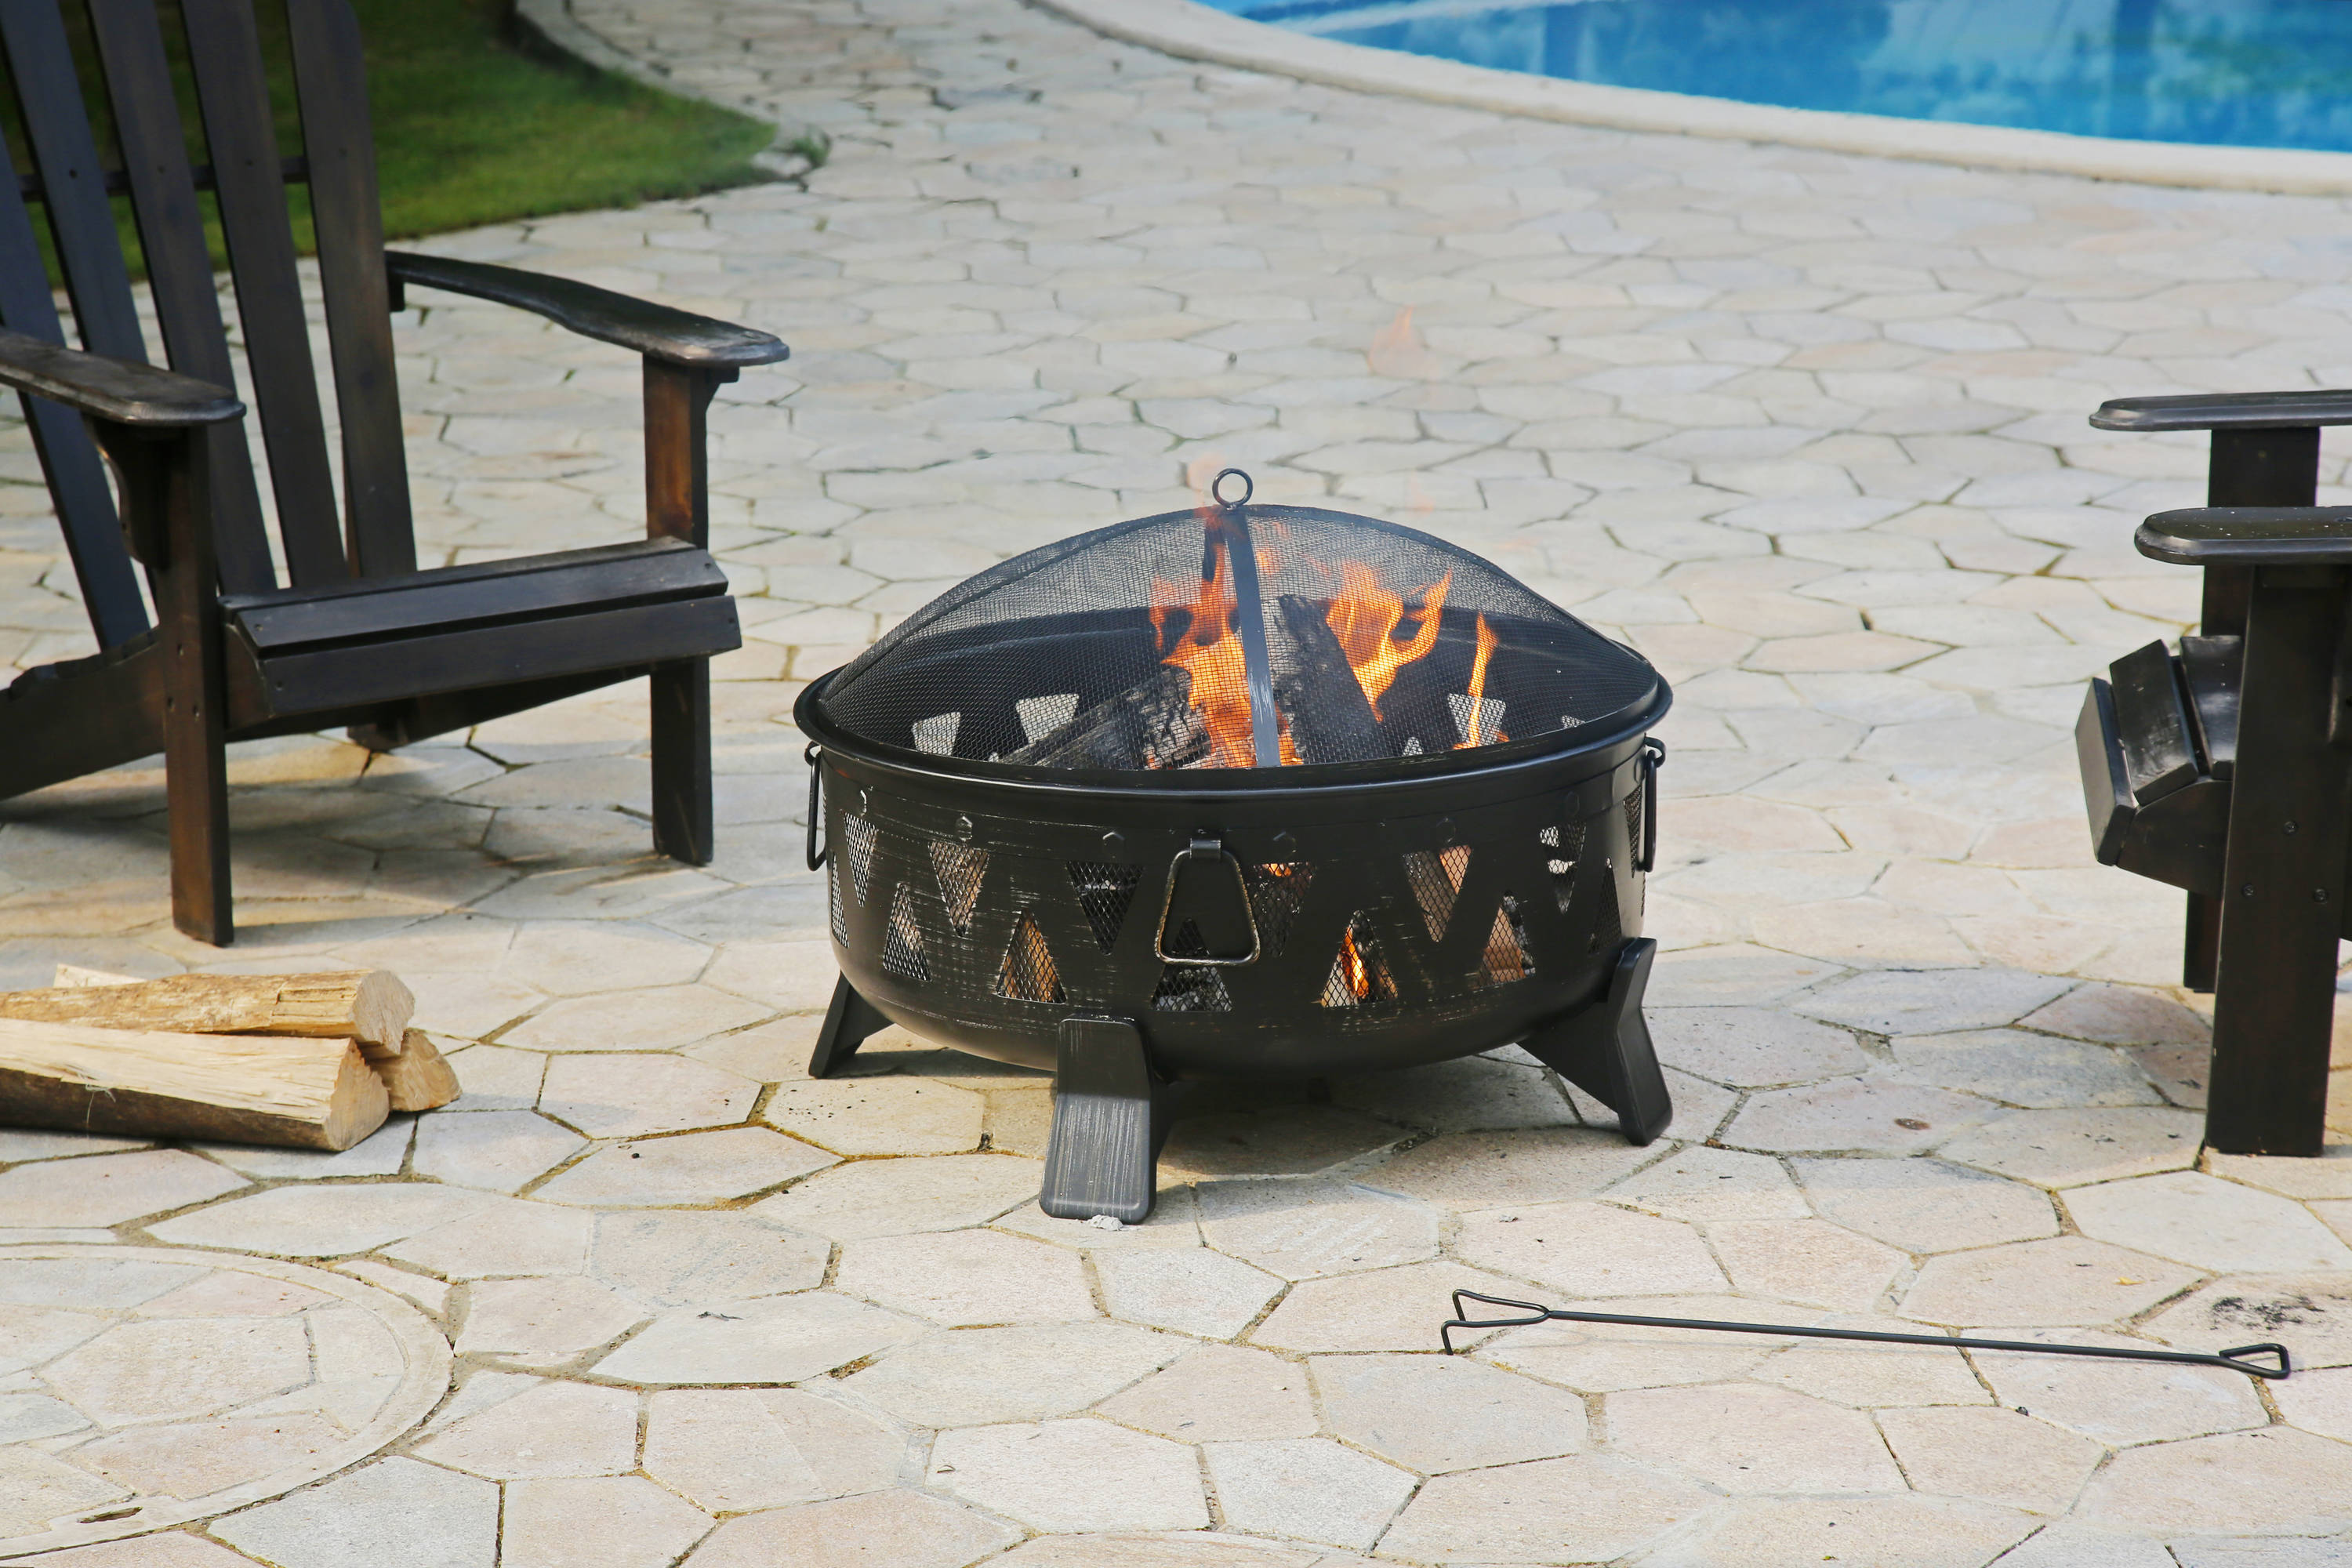 Wood-Burning Wood-Burning at Pit Antique Pits the W Black department Fire Fire Selections Style 29.9-in Steel in